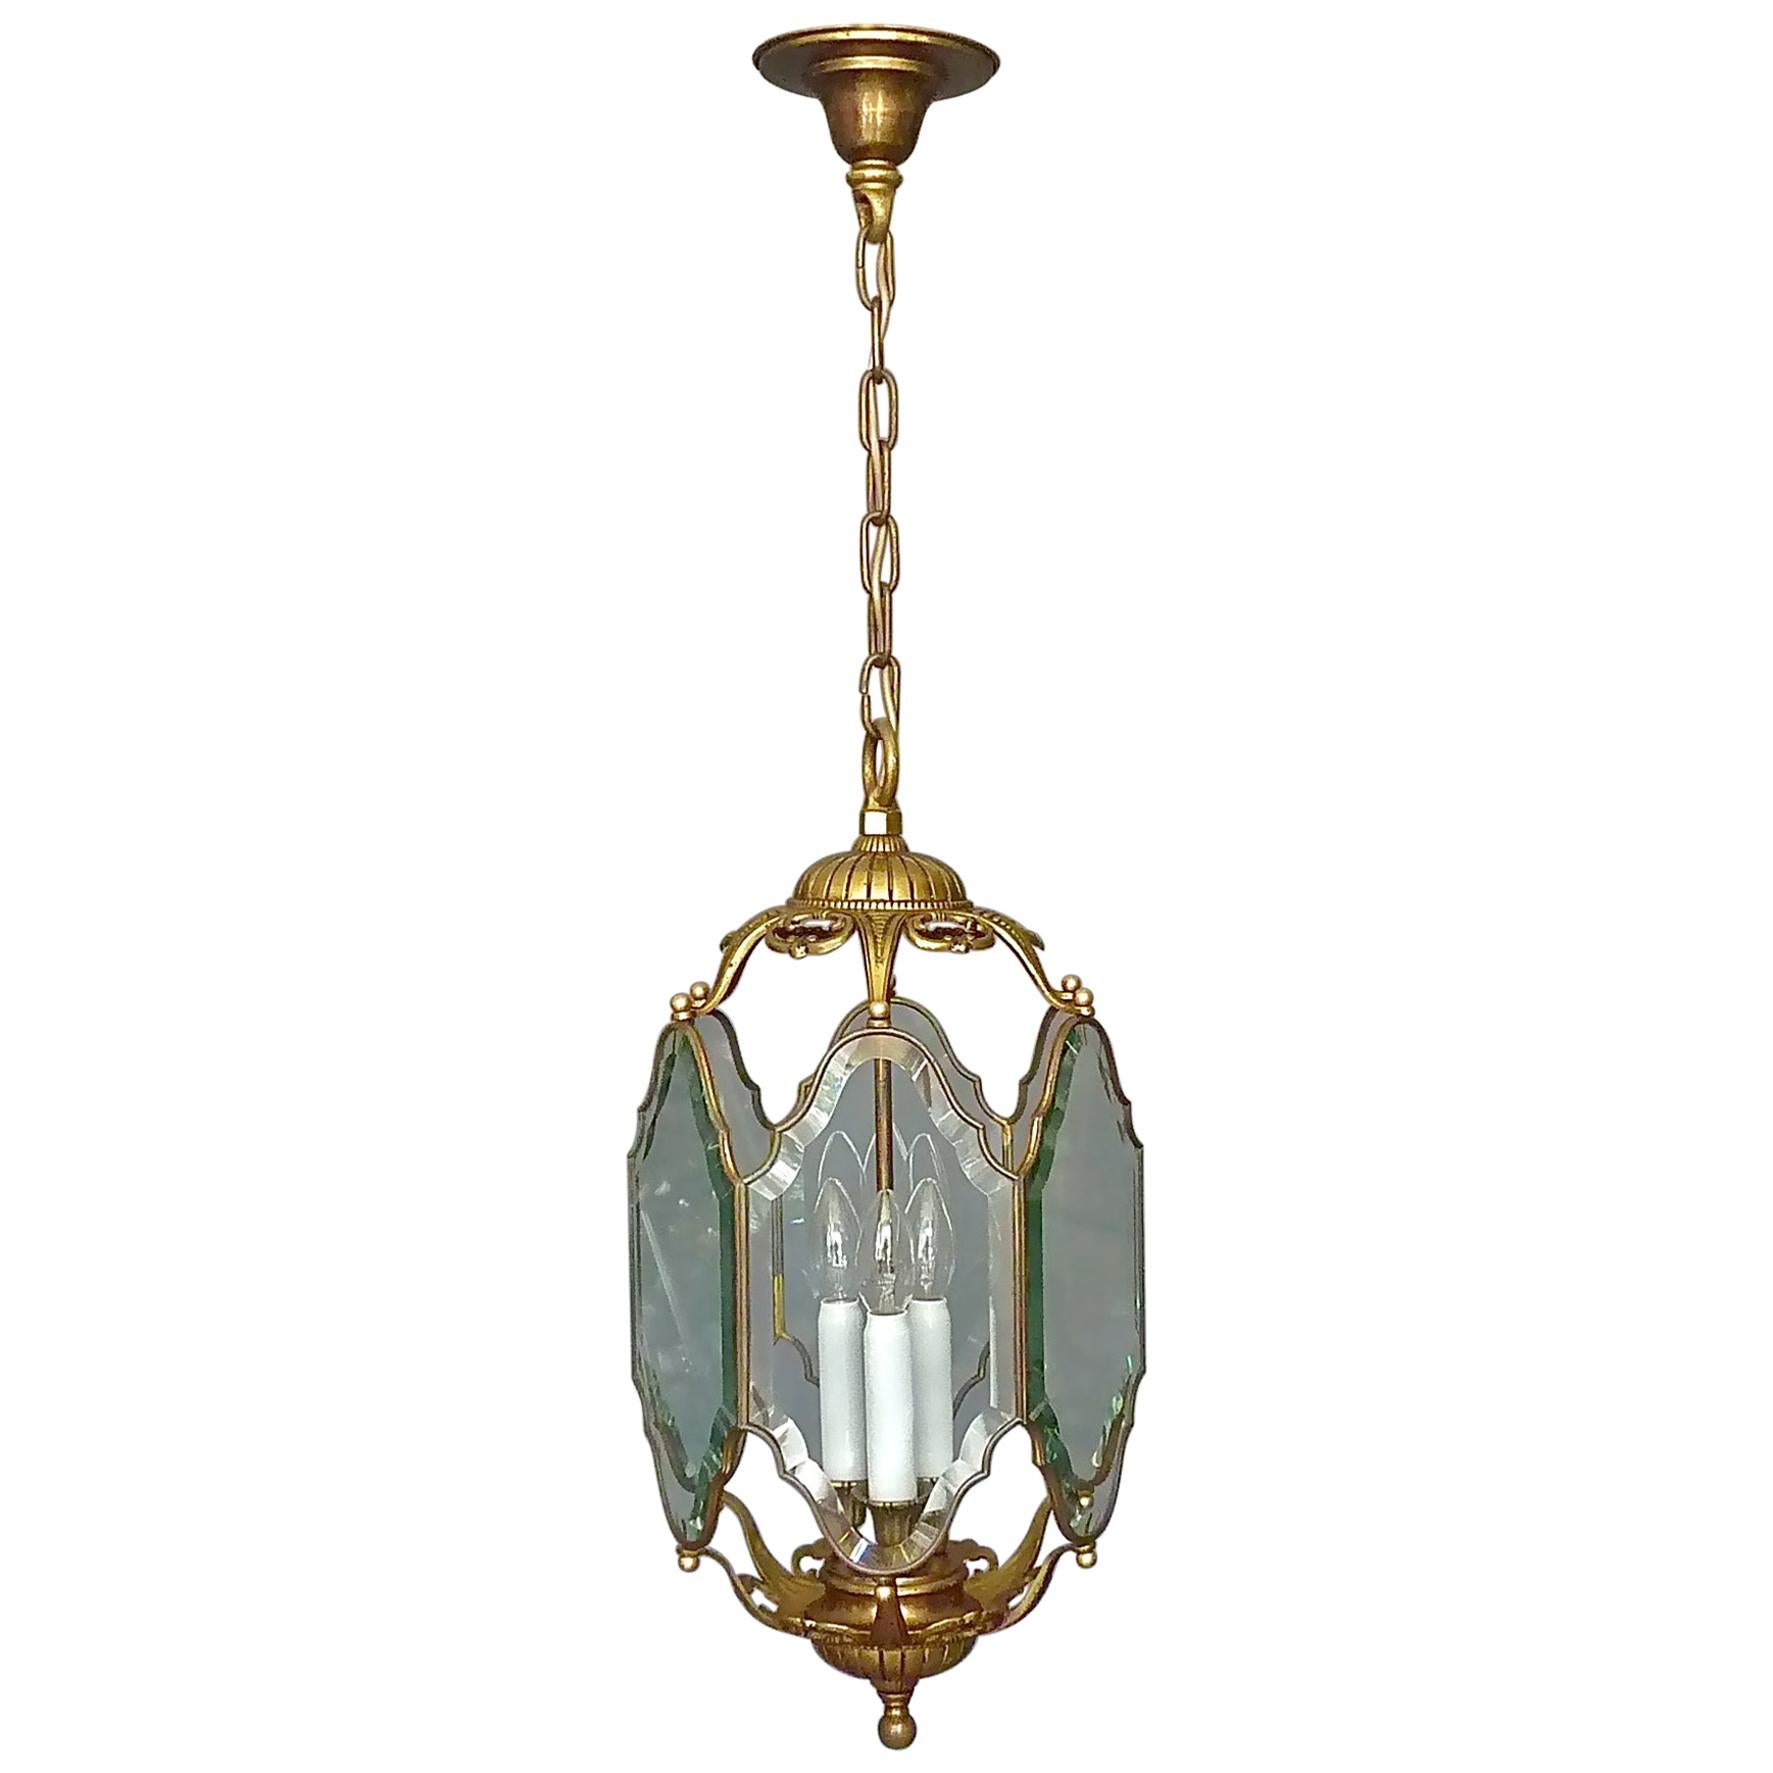 Large Antique French Lantern Lamp Faceted Crystal Glass Bronze Brass 1880 - 1900